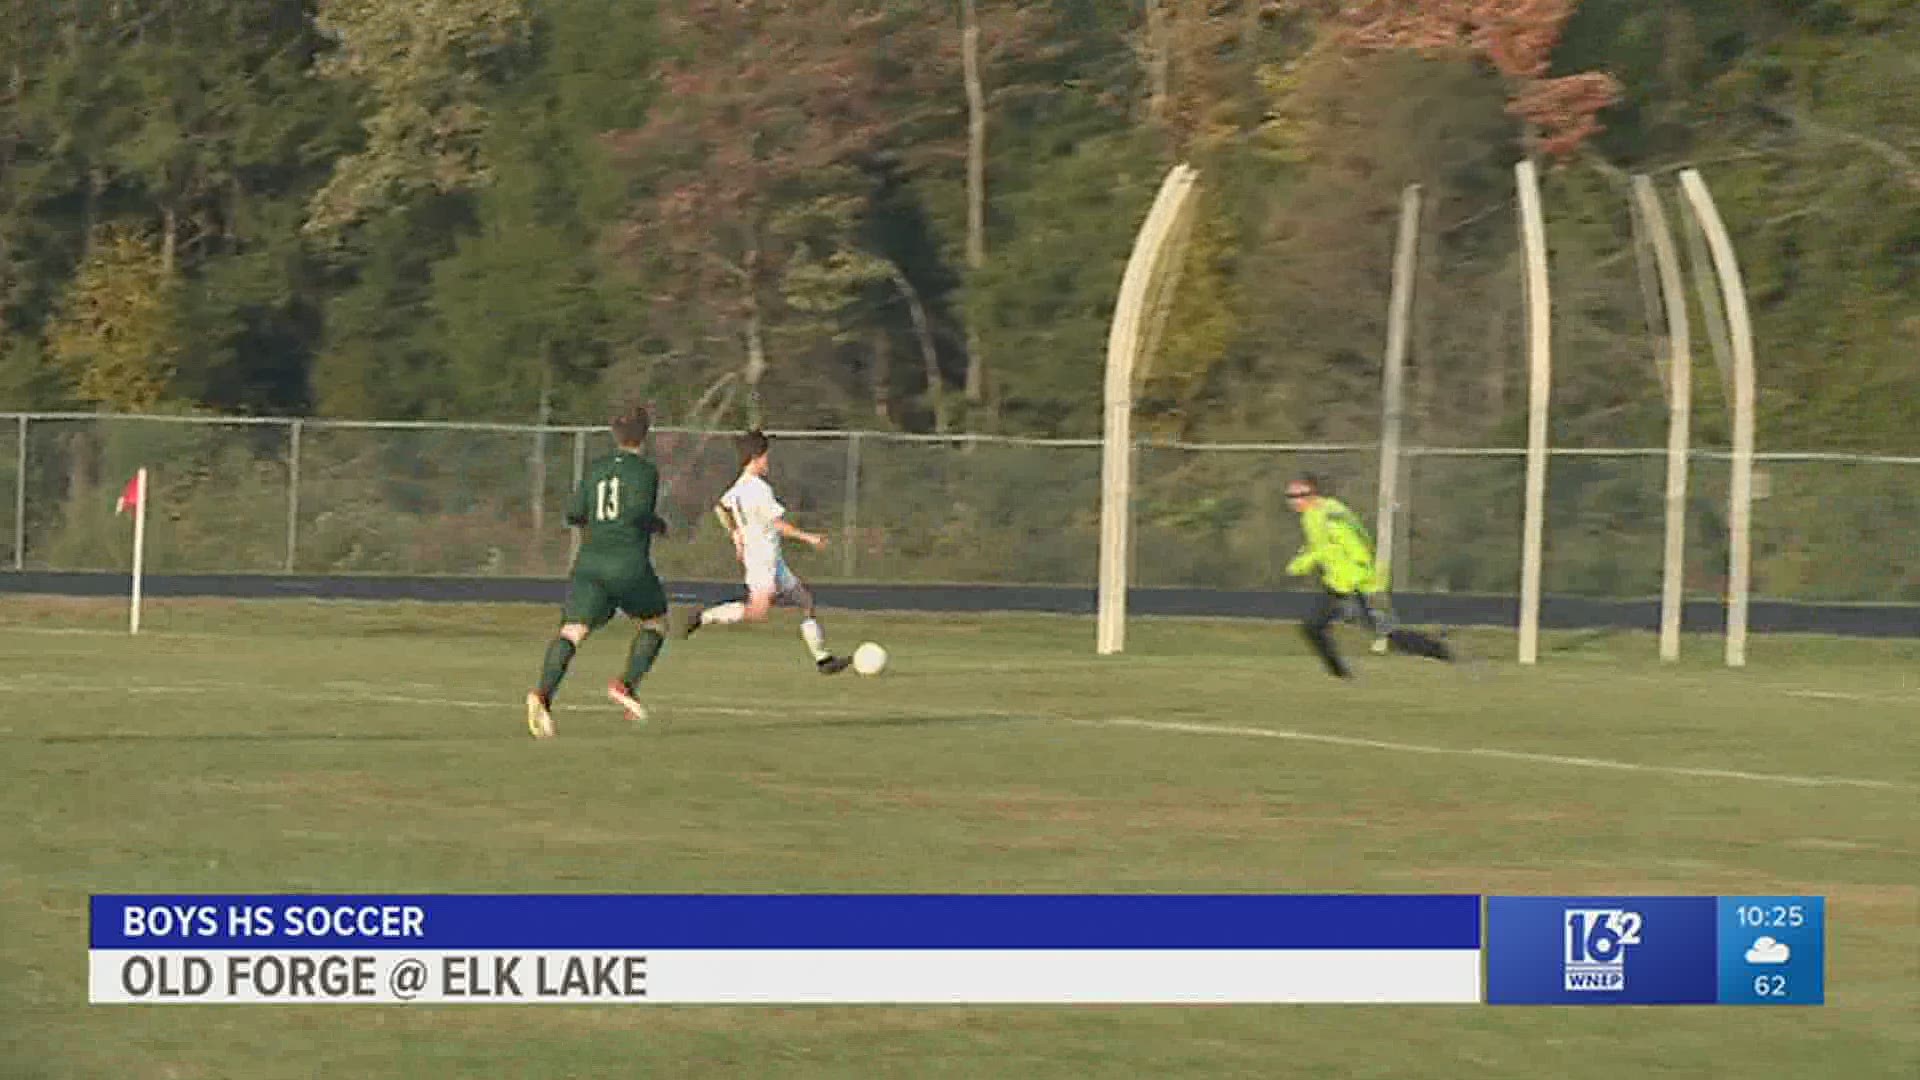 Old Forge stays unbeaten in boys soccer as they rally past Elk Lake 6-3